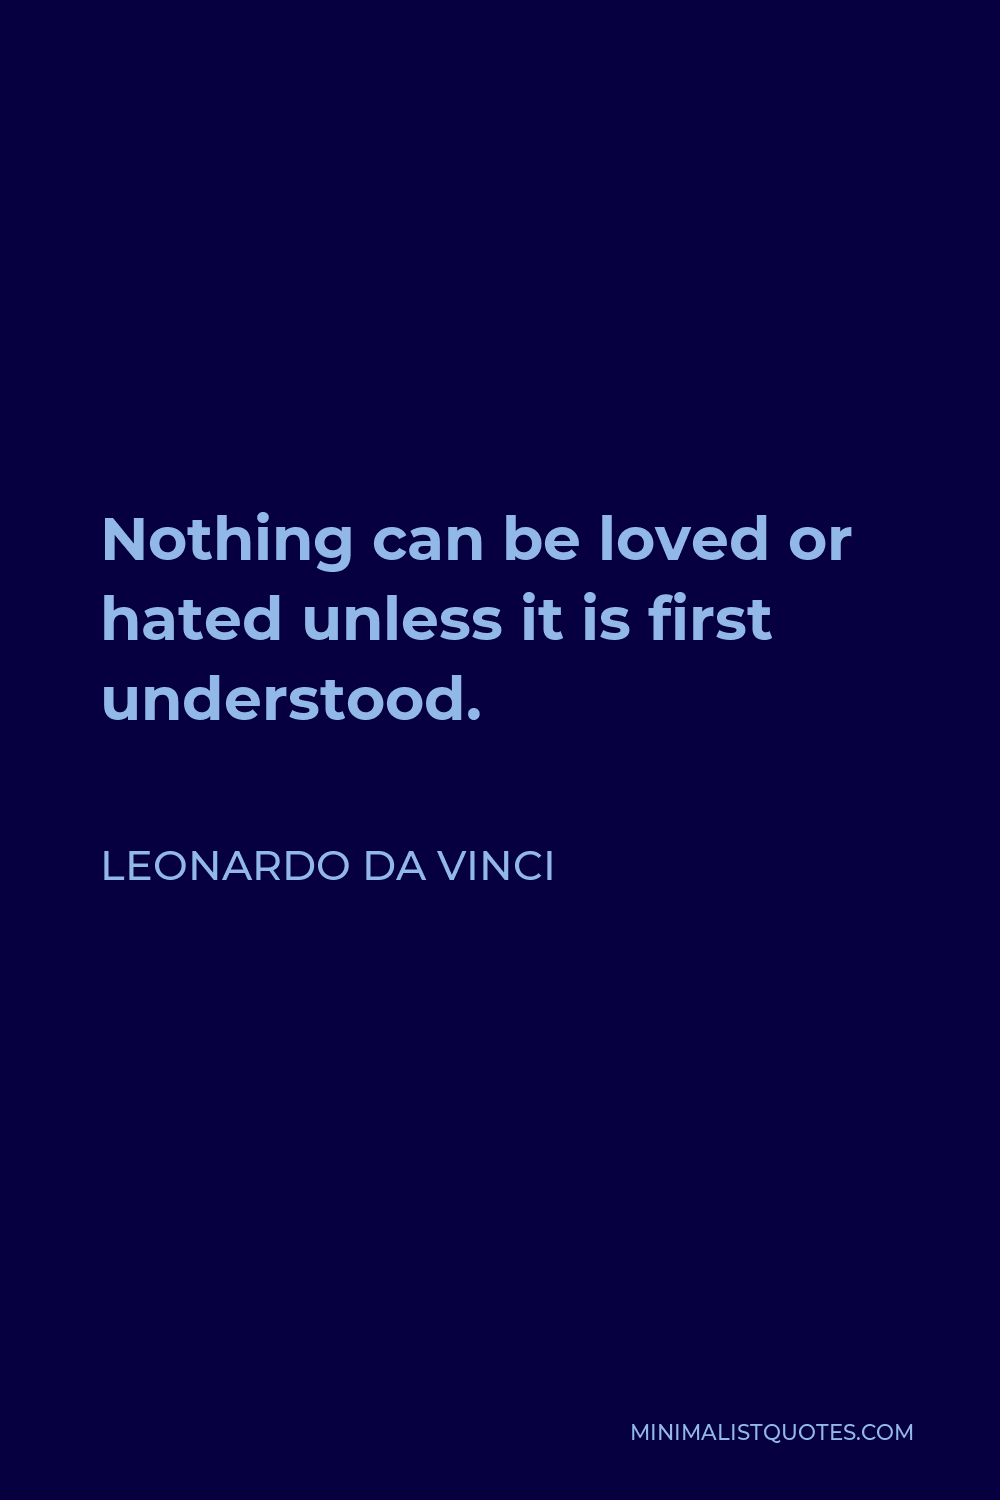 Leonardo da Vinci Quote - Nothing can be loved or hated unless it is first understood.